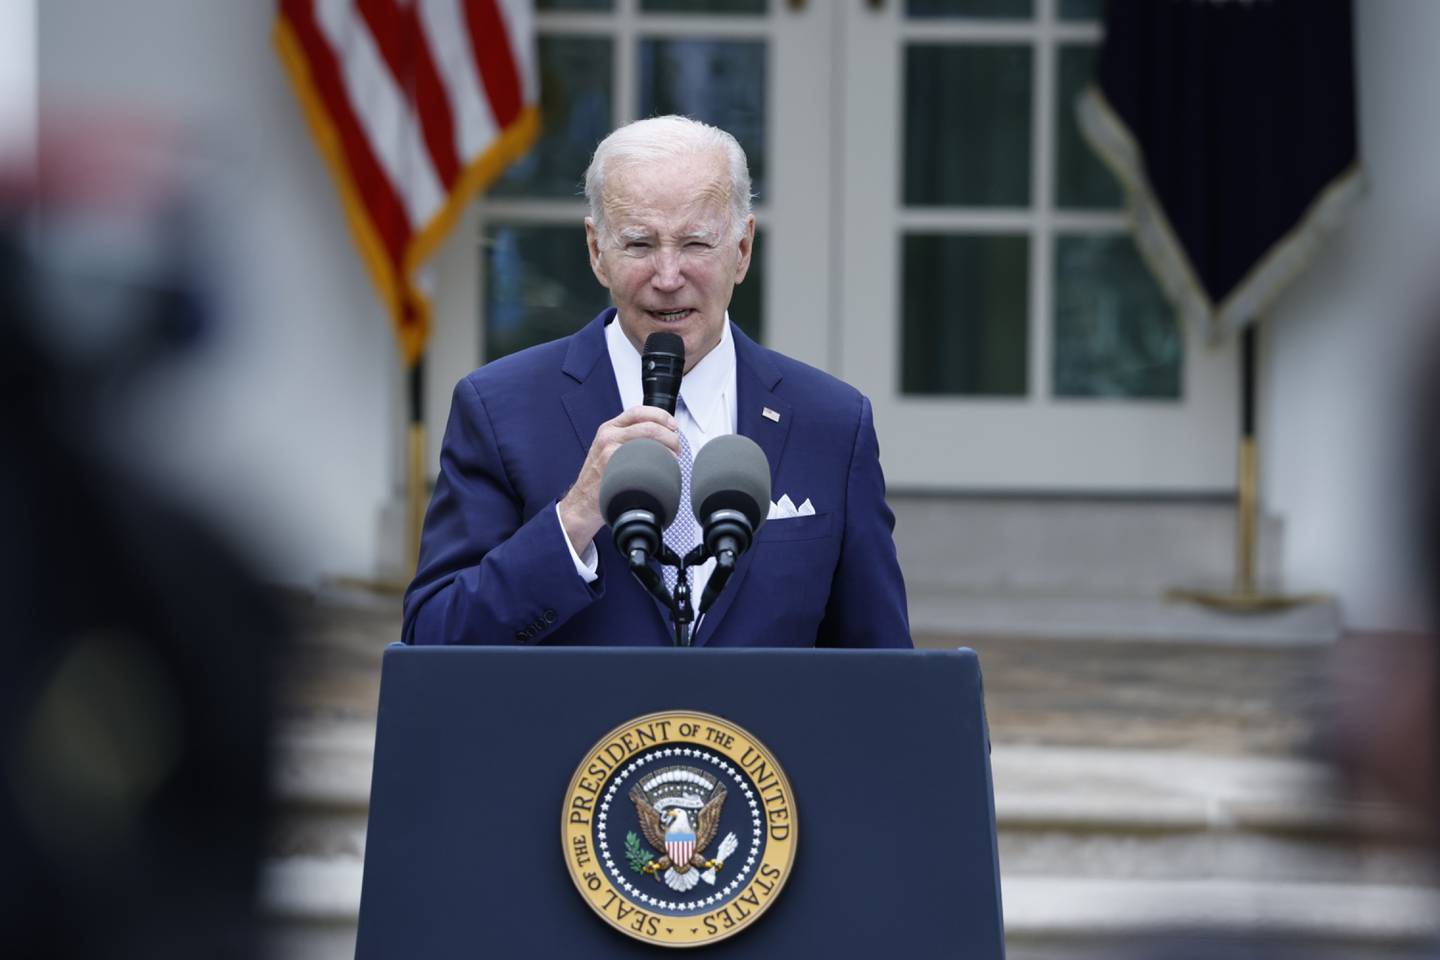 US President Joe Biden speaks during a National Small Business Week event in the Rose Garden of the White House in Washington, DC, US, on Monday, May 1, 2023. Photographer: Ting Shen/Bloomberg